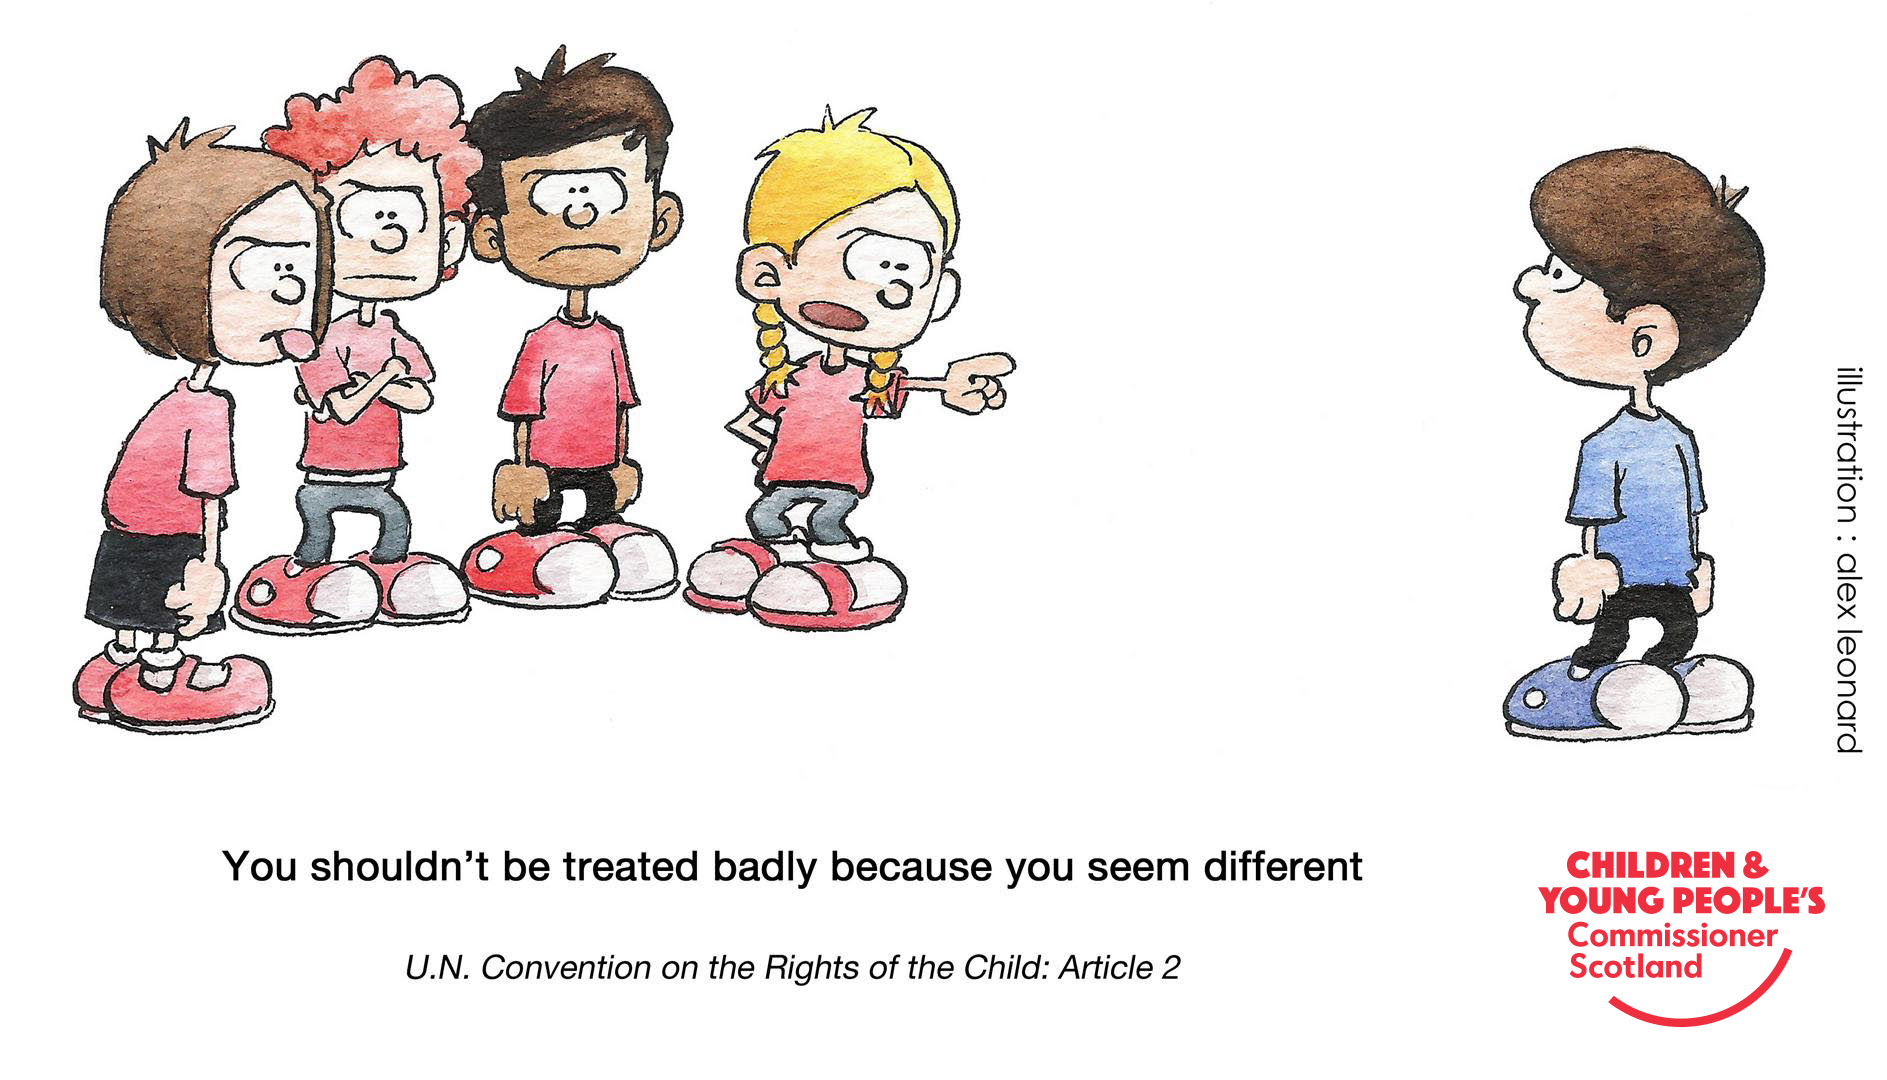 Children's rights in pictures.